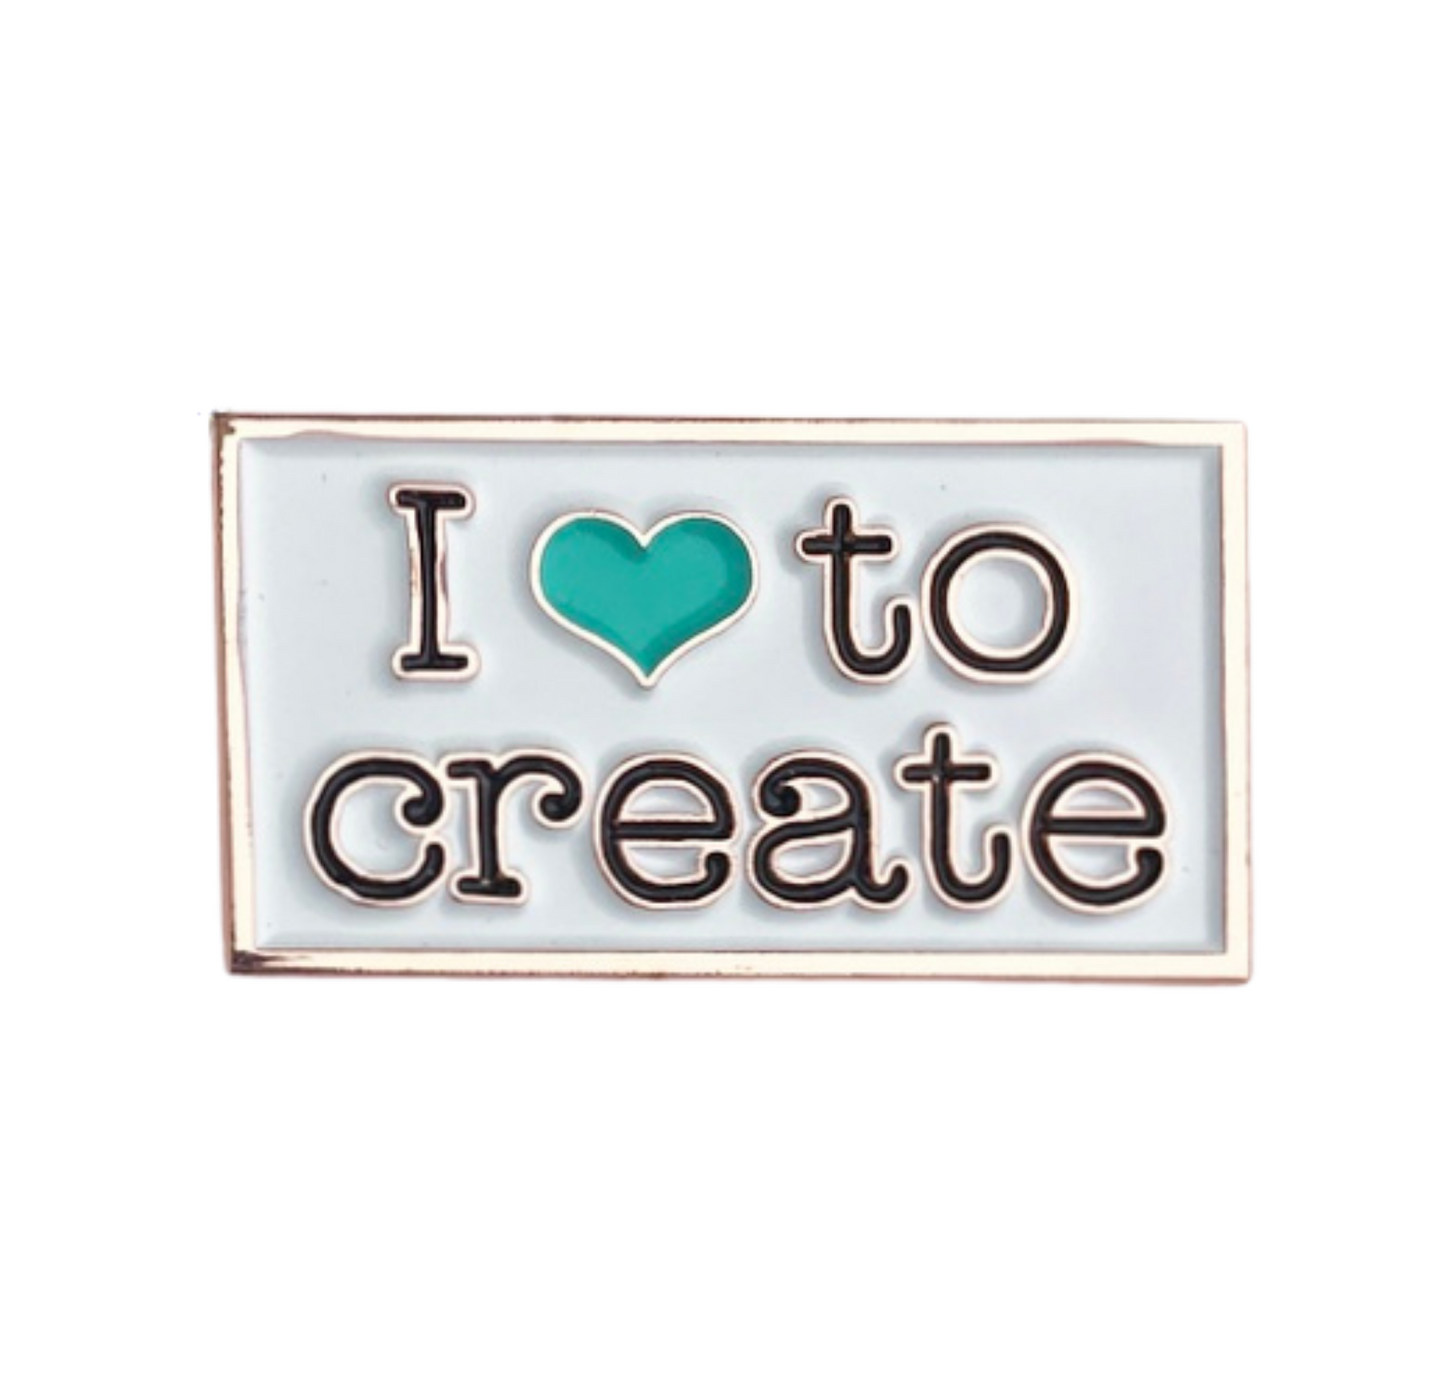 I Love to Create Enamel Pin by Maker Valley